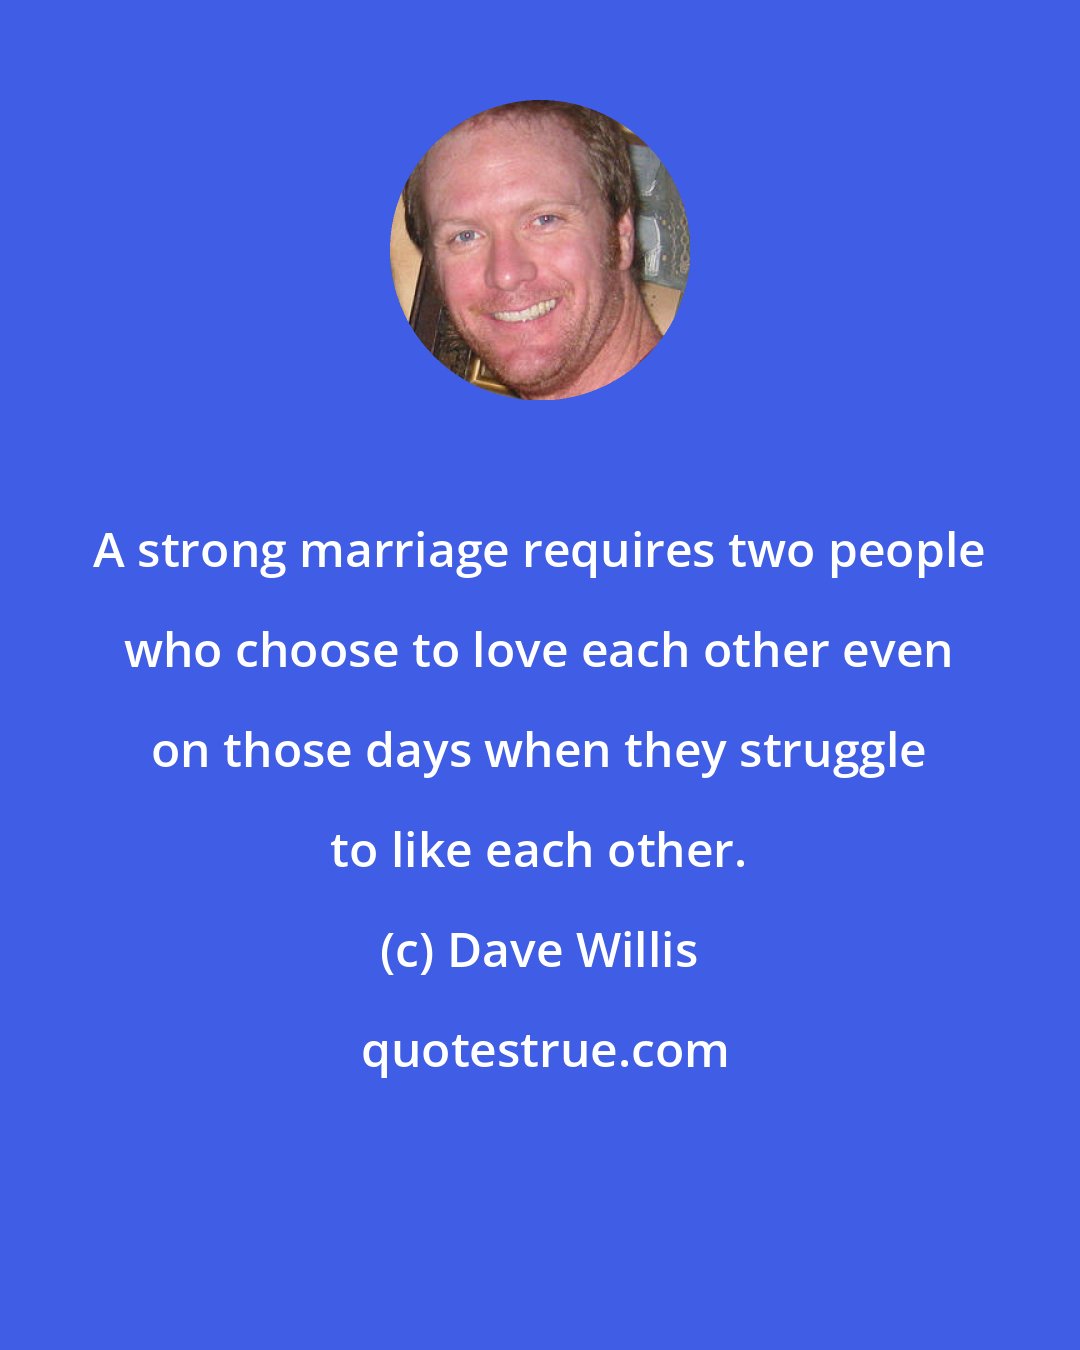 Dave Willis: A strong marriage requires two people who choose to love each other even on those days when they struggle to like each other.